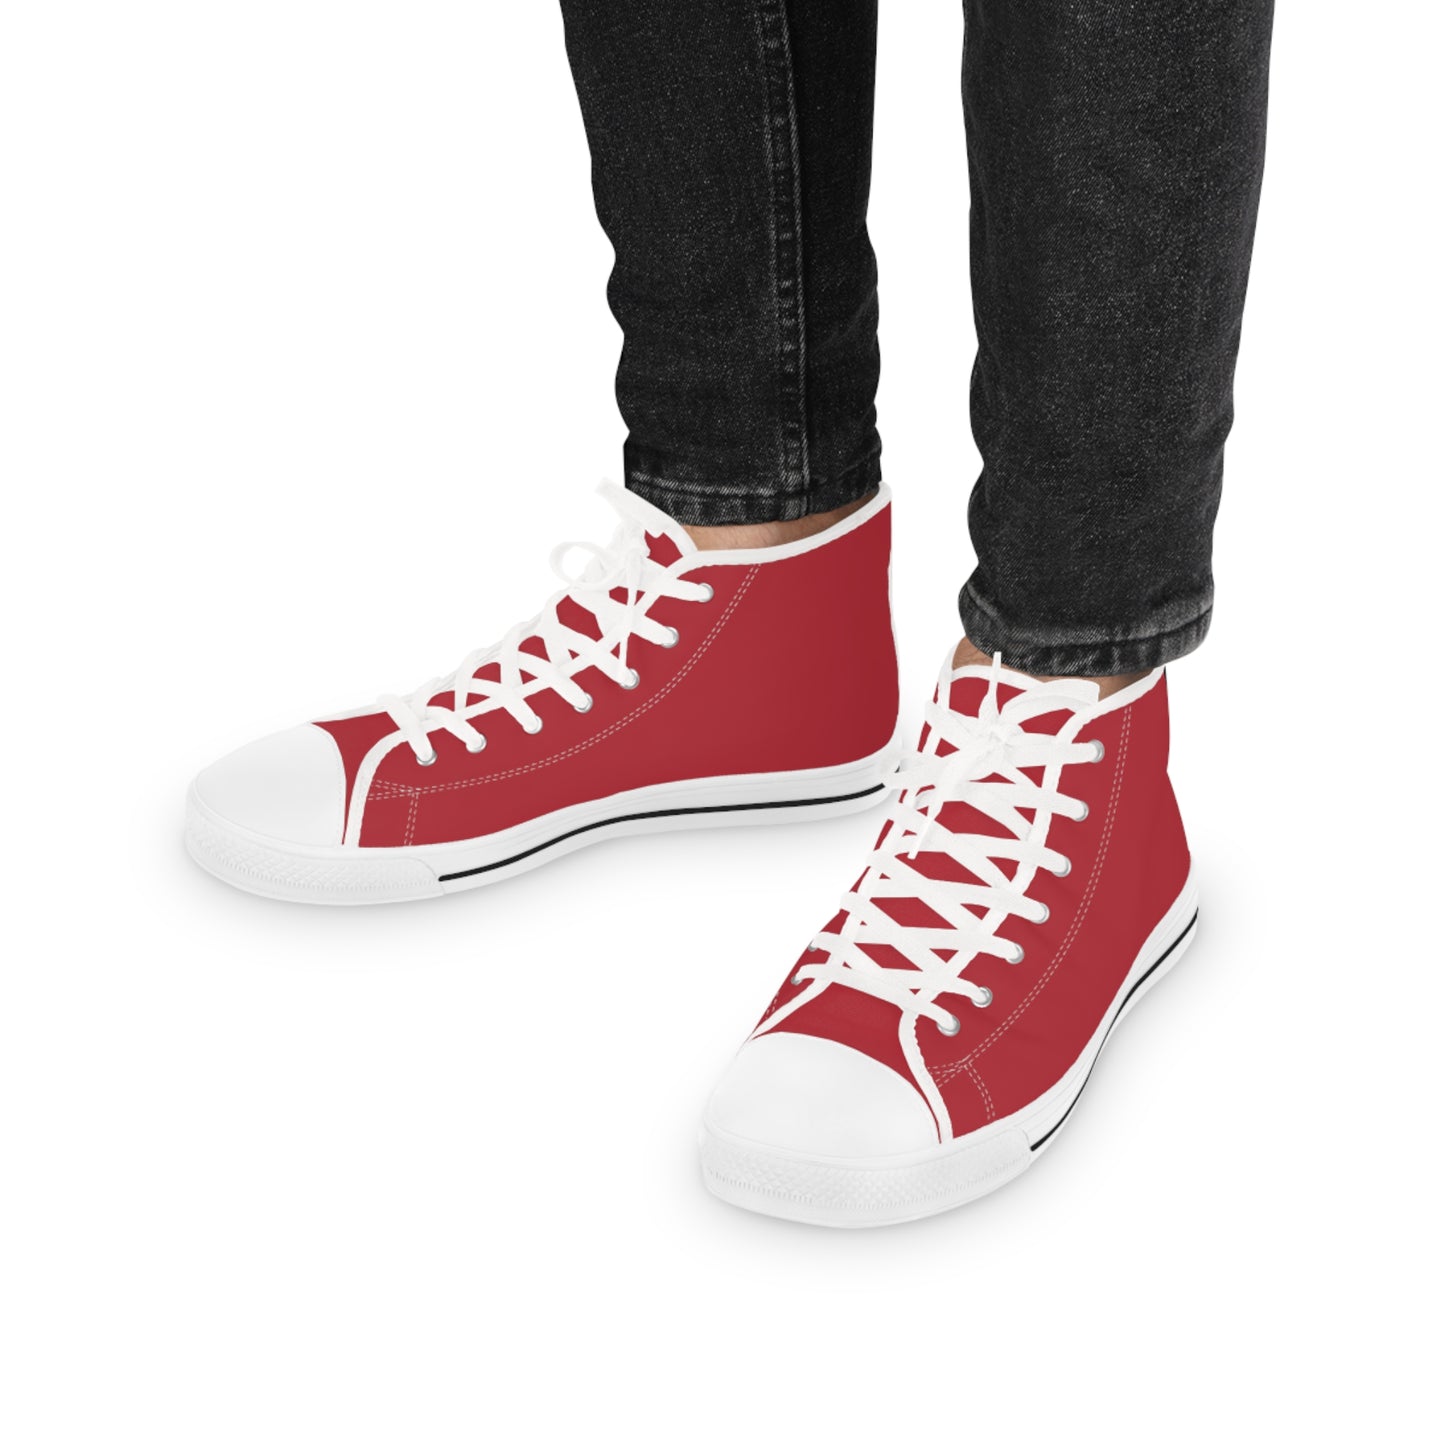 Men's High Top Sneakers - Red US 14 White sole